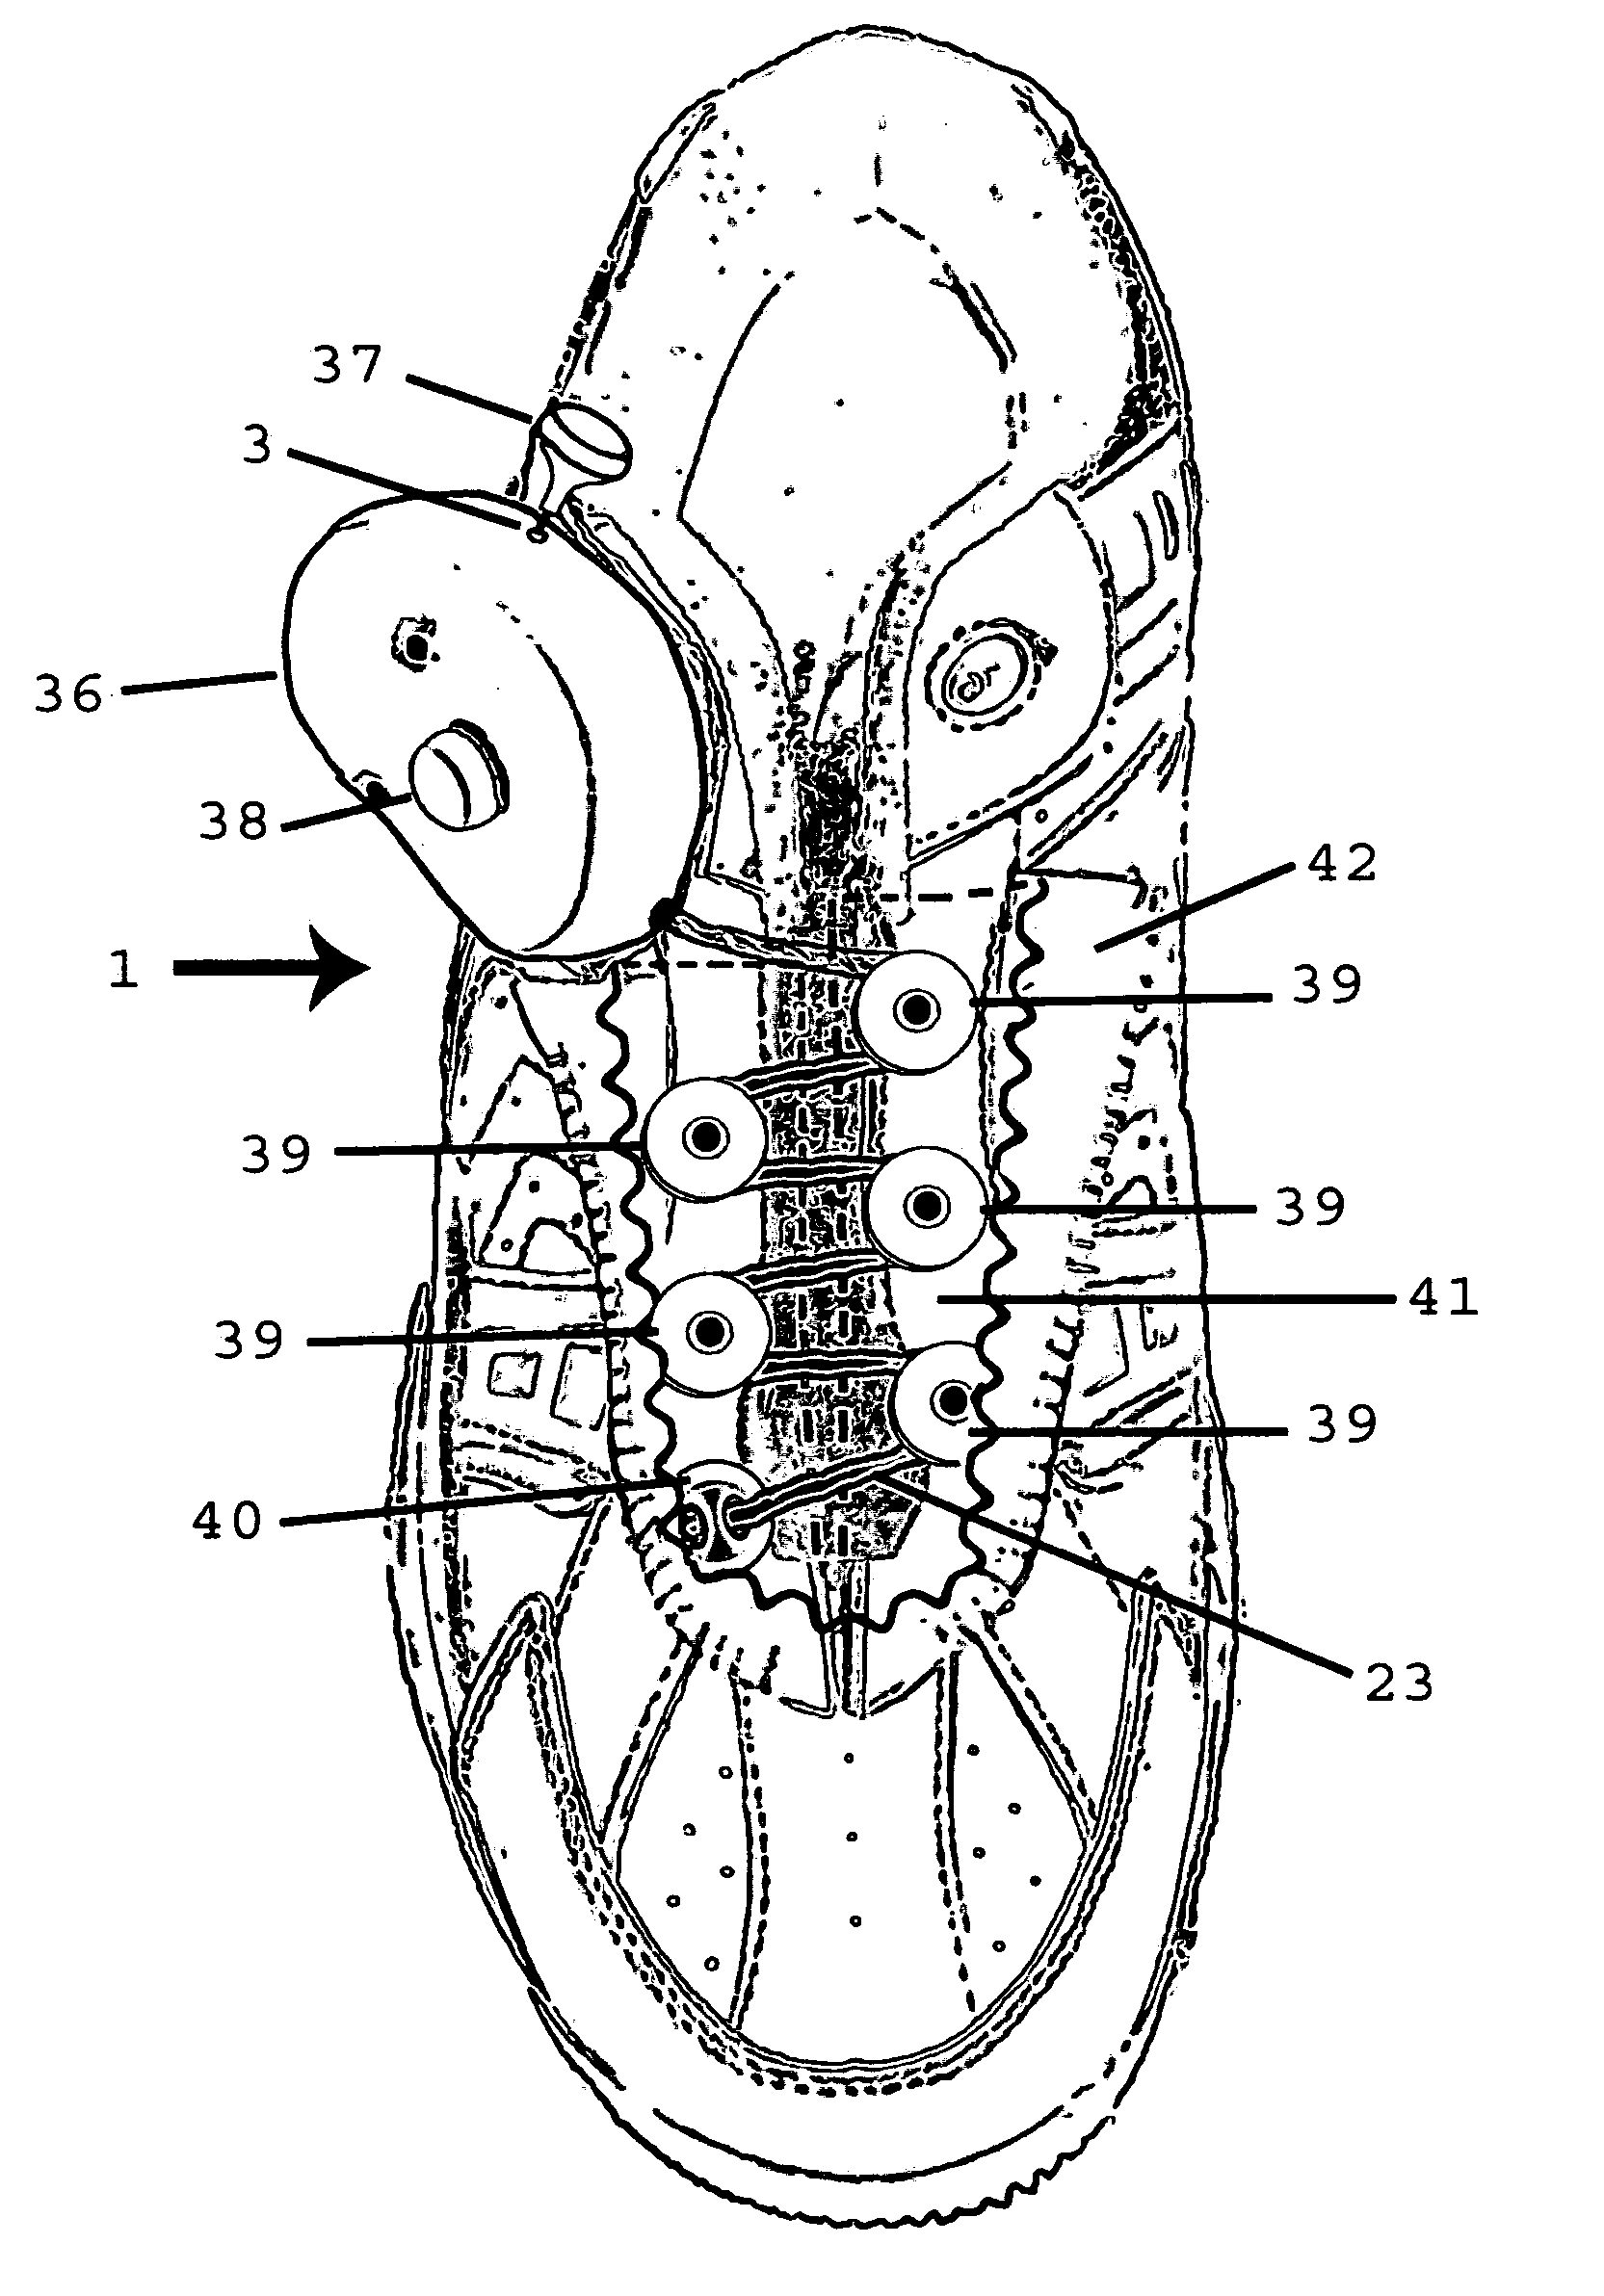 Pull-cord and pulley lacing system